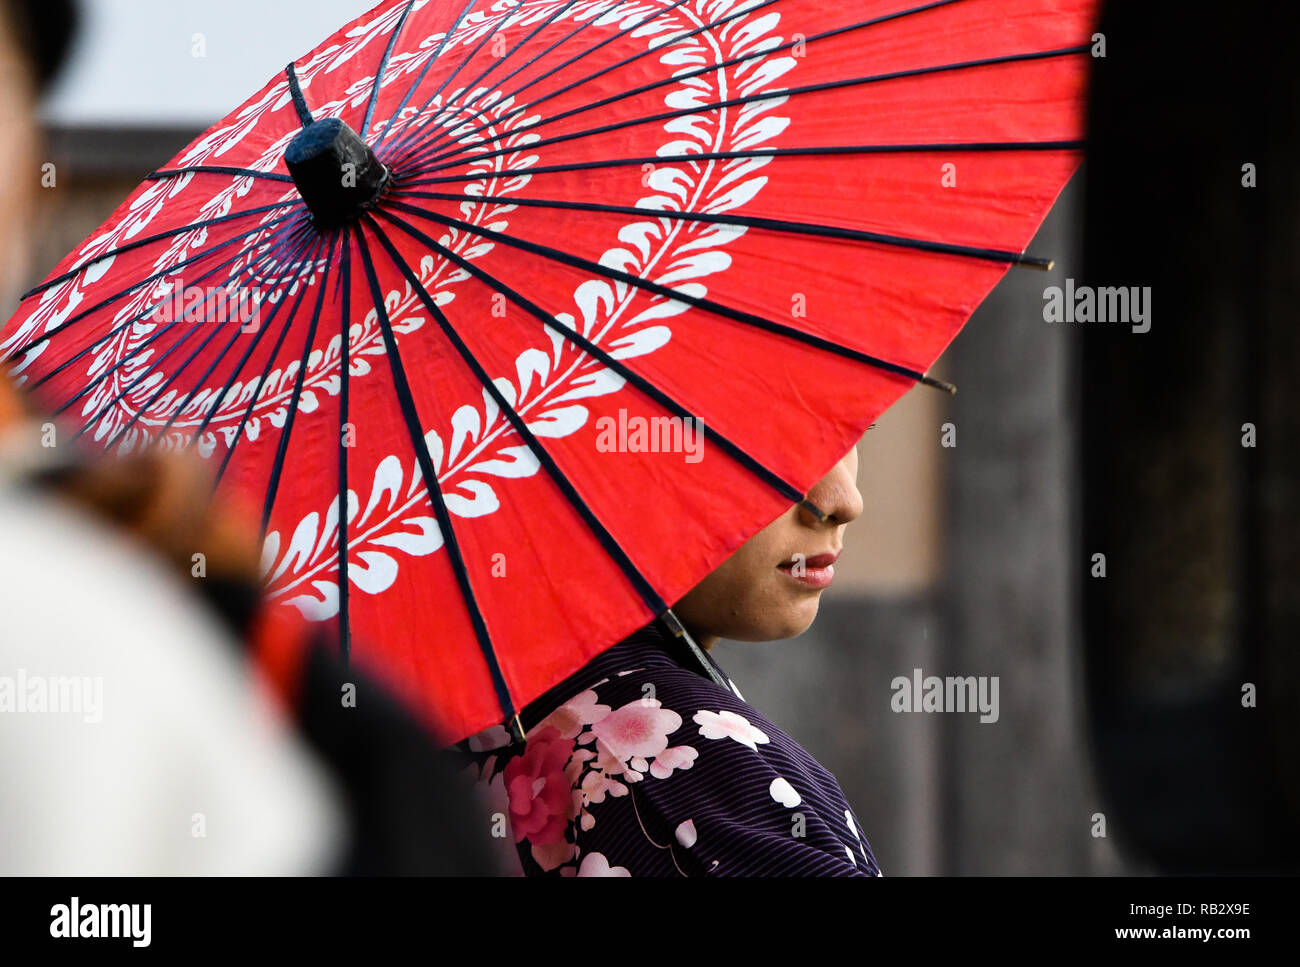 Osaka, Japan. 2nd Jan, 2019. A girl holds an umbrella at the Iconic Buddhist temple Kiyomizu-dera on Mount Otowa known for the scenic views on Wednesday, January 2, 2019. Photo by: Ramiro Agustin Vargas Tabares Credit: Ramiro Agustin Vargas Tabares/ZUMA Wire/Alamy Live News Stock Photo